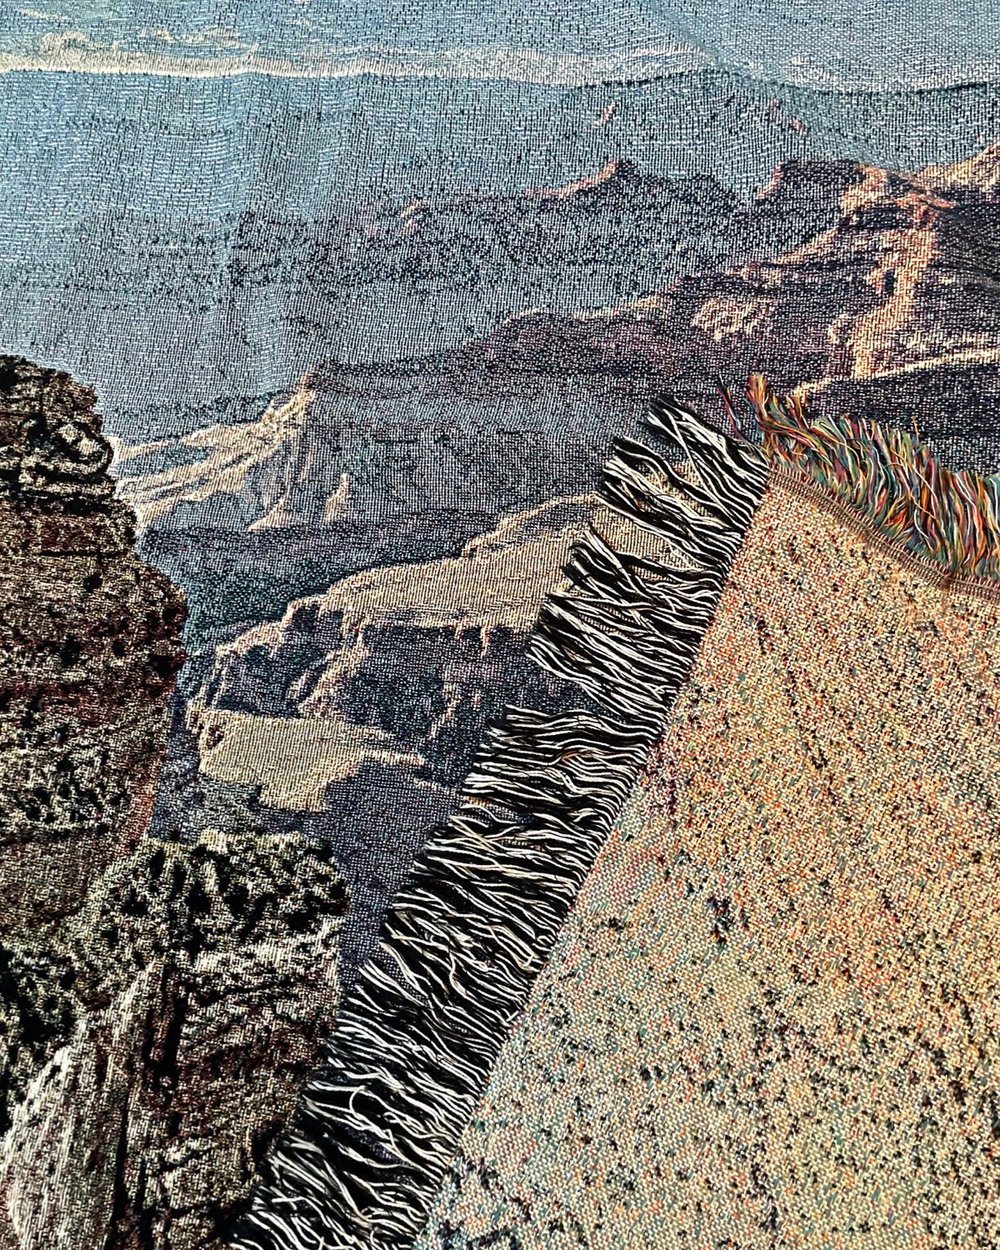 Archive Blanket #12 - Grand Canyon